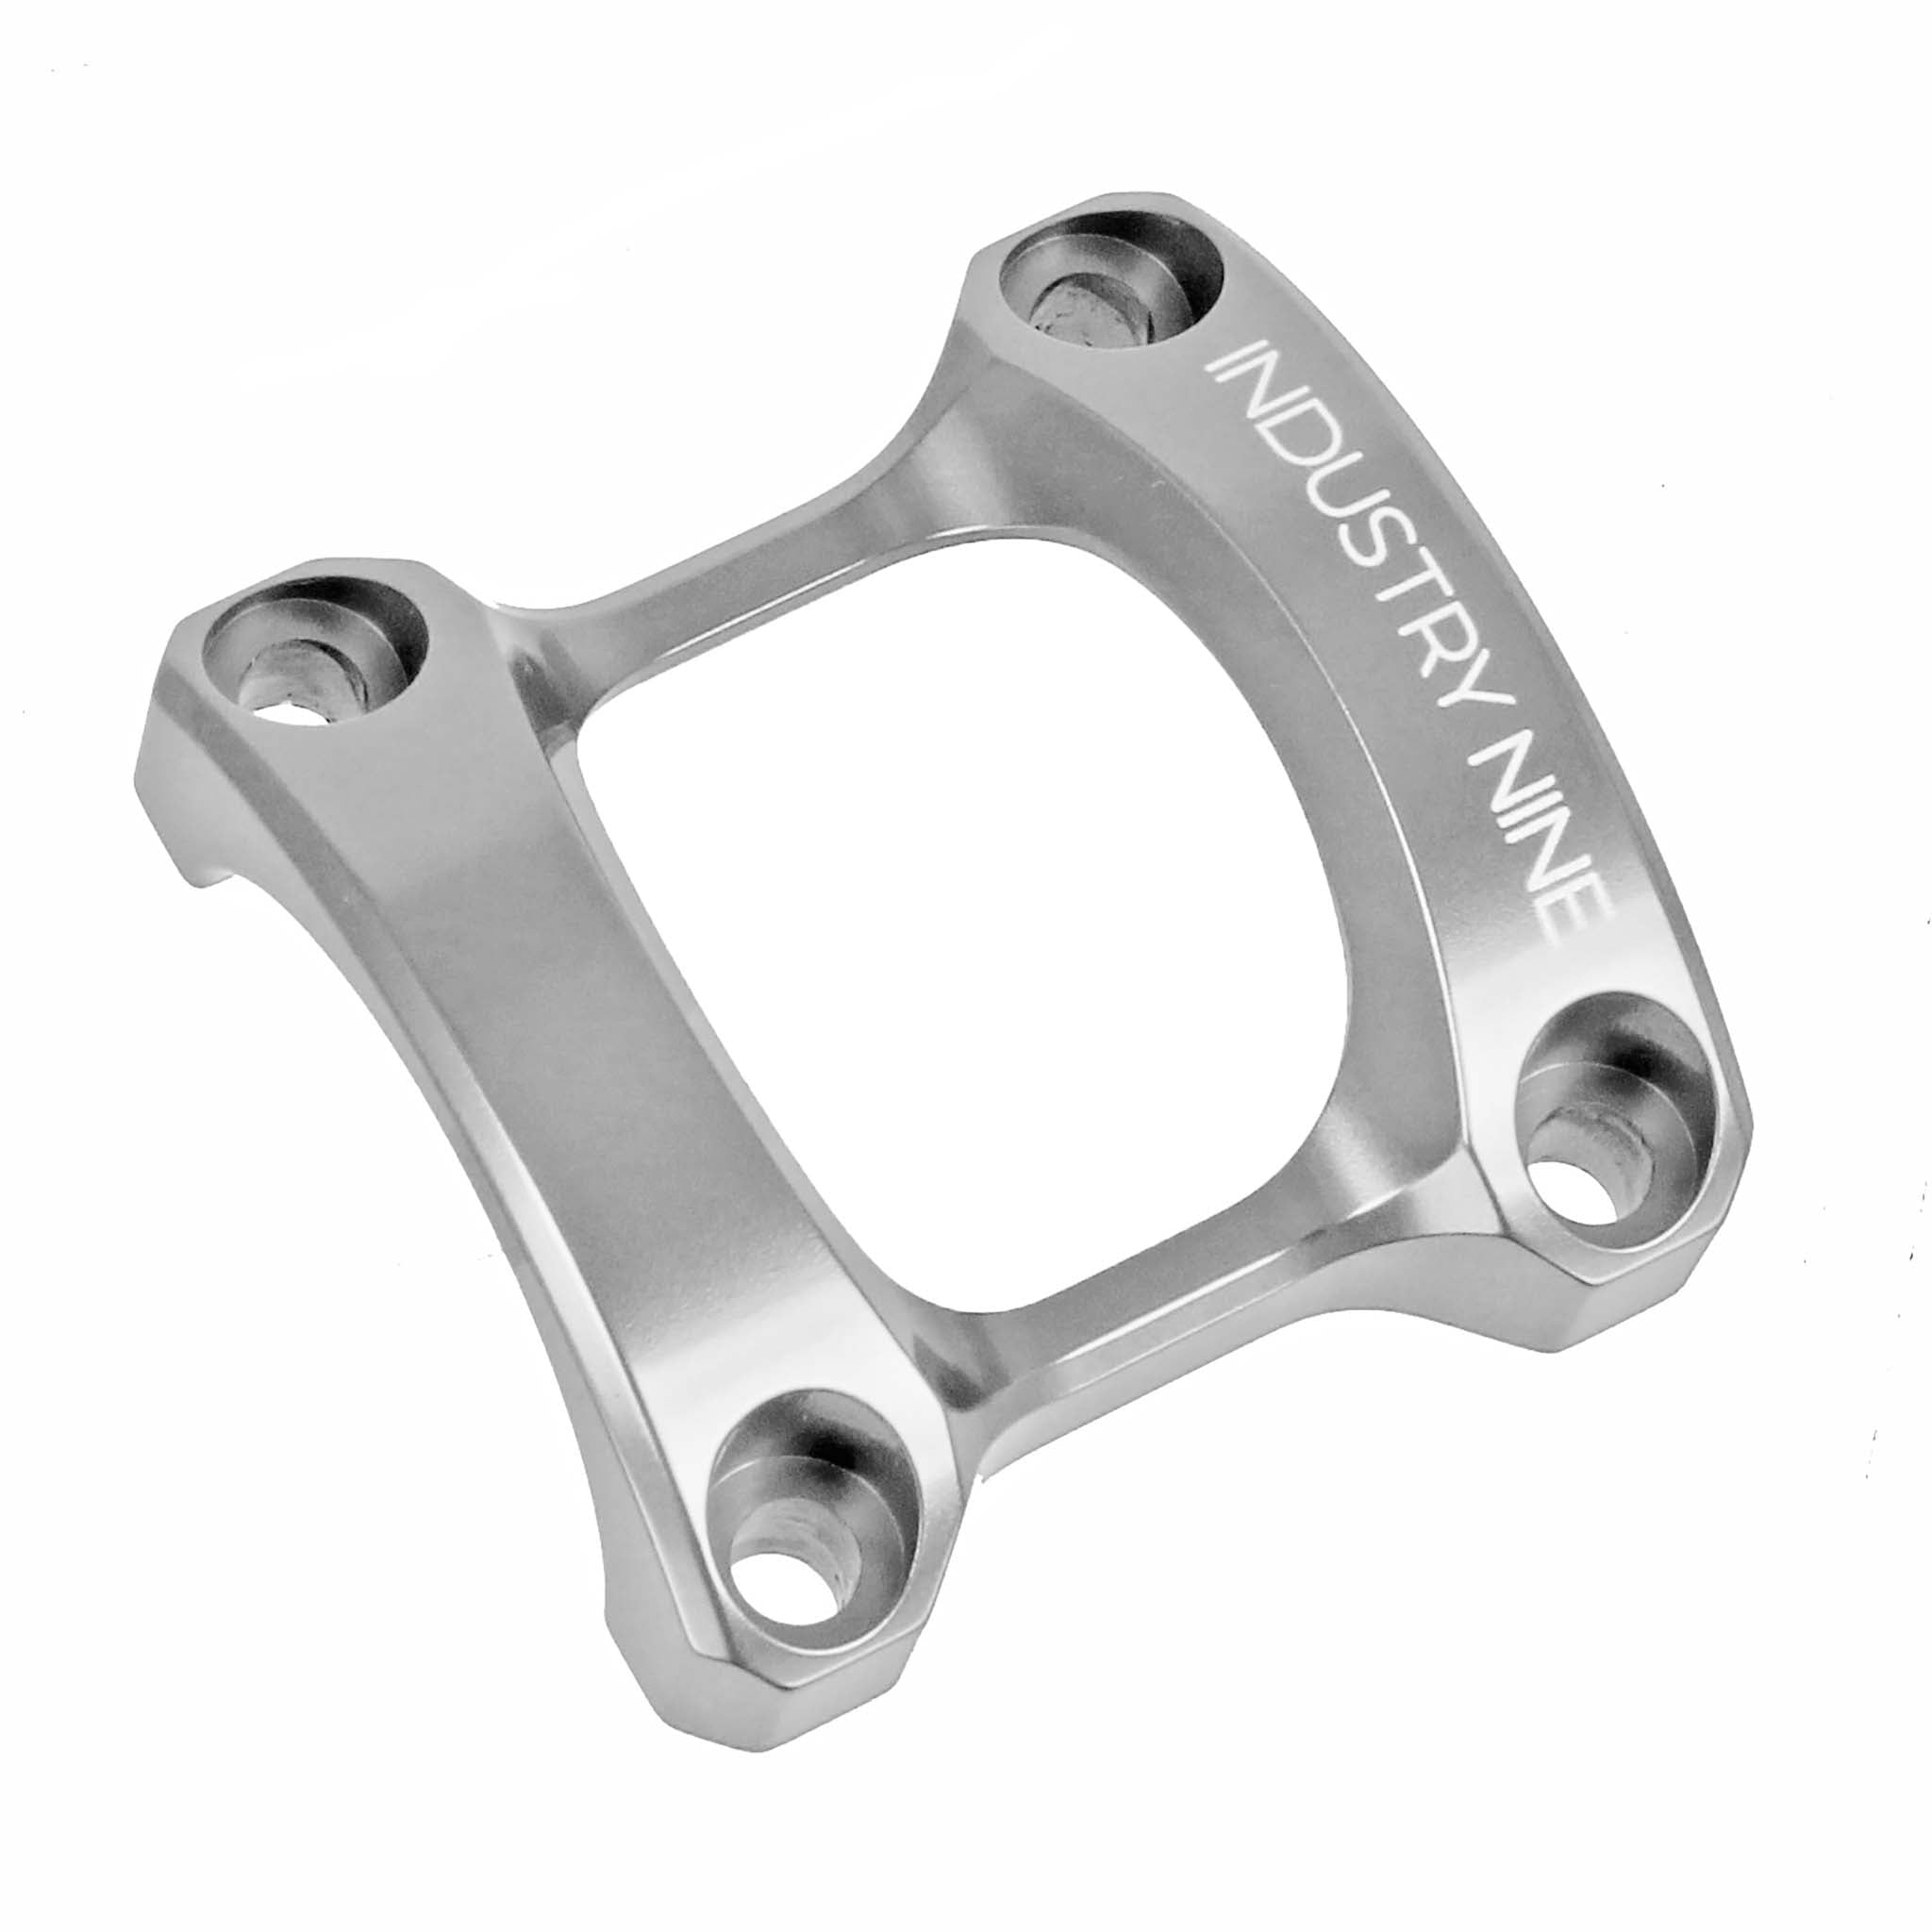 Industry Nine A35 Stem Faceplate Silver